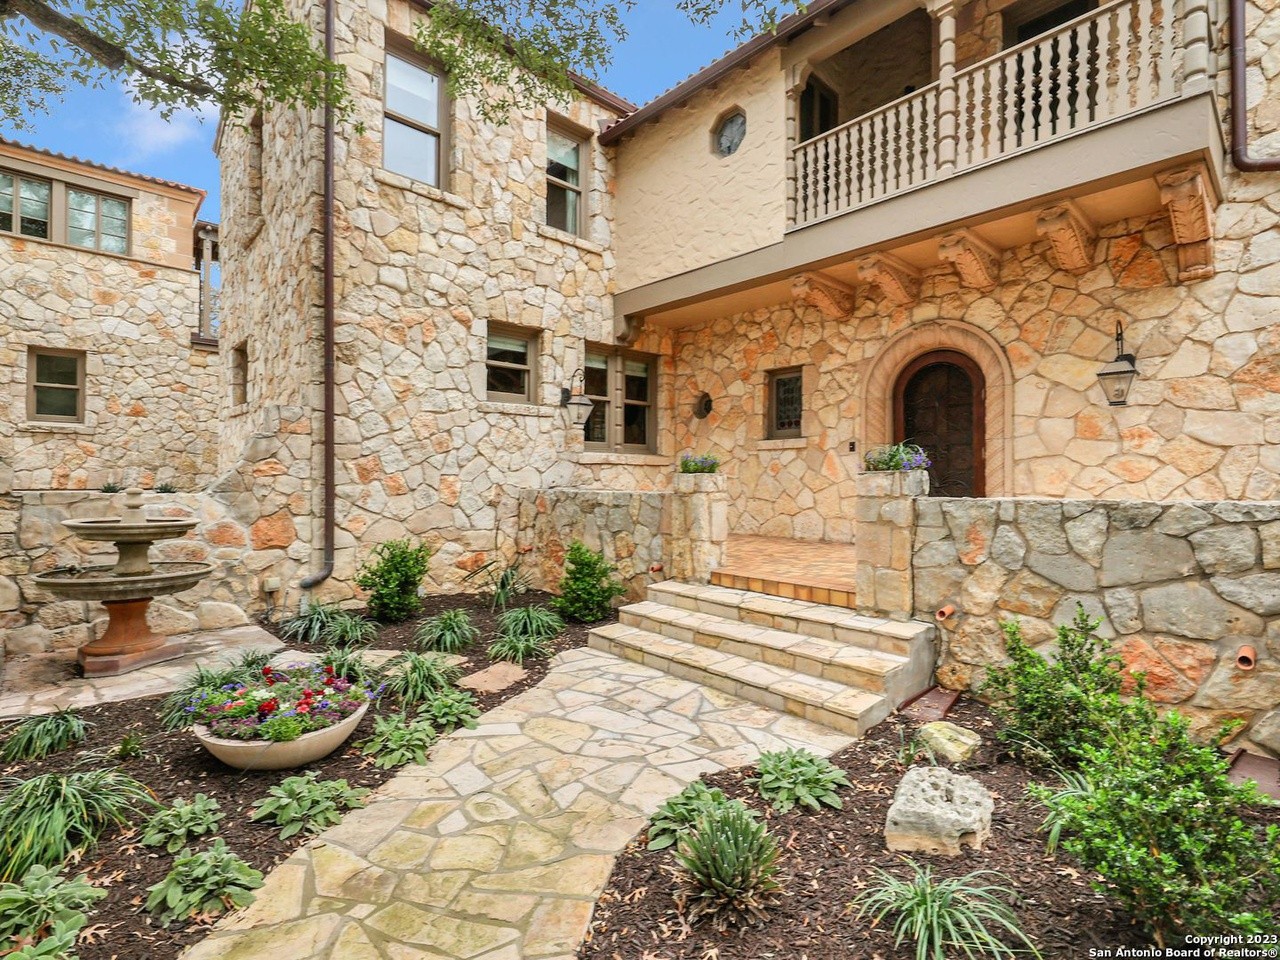 This San Antonio mansion comes with a basement bar-plus-wine cellar and a $250,000 price cut